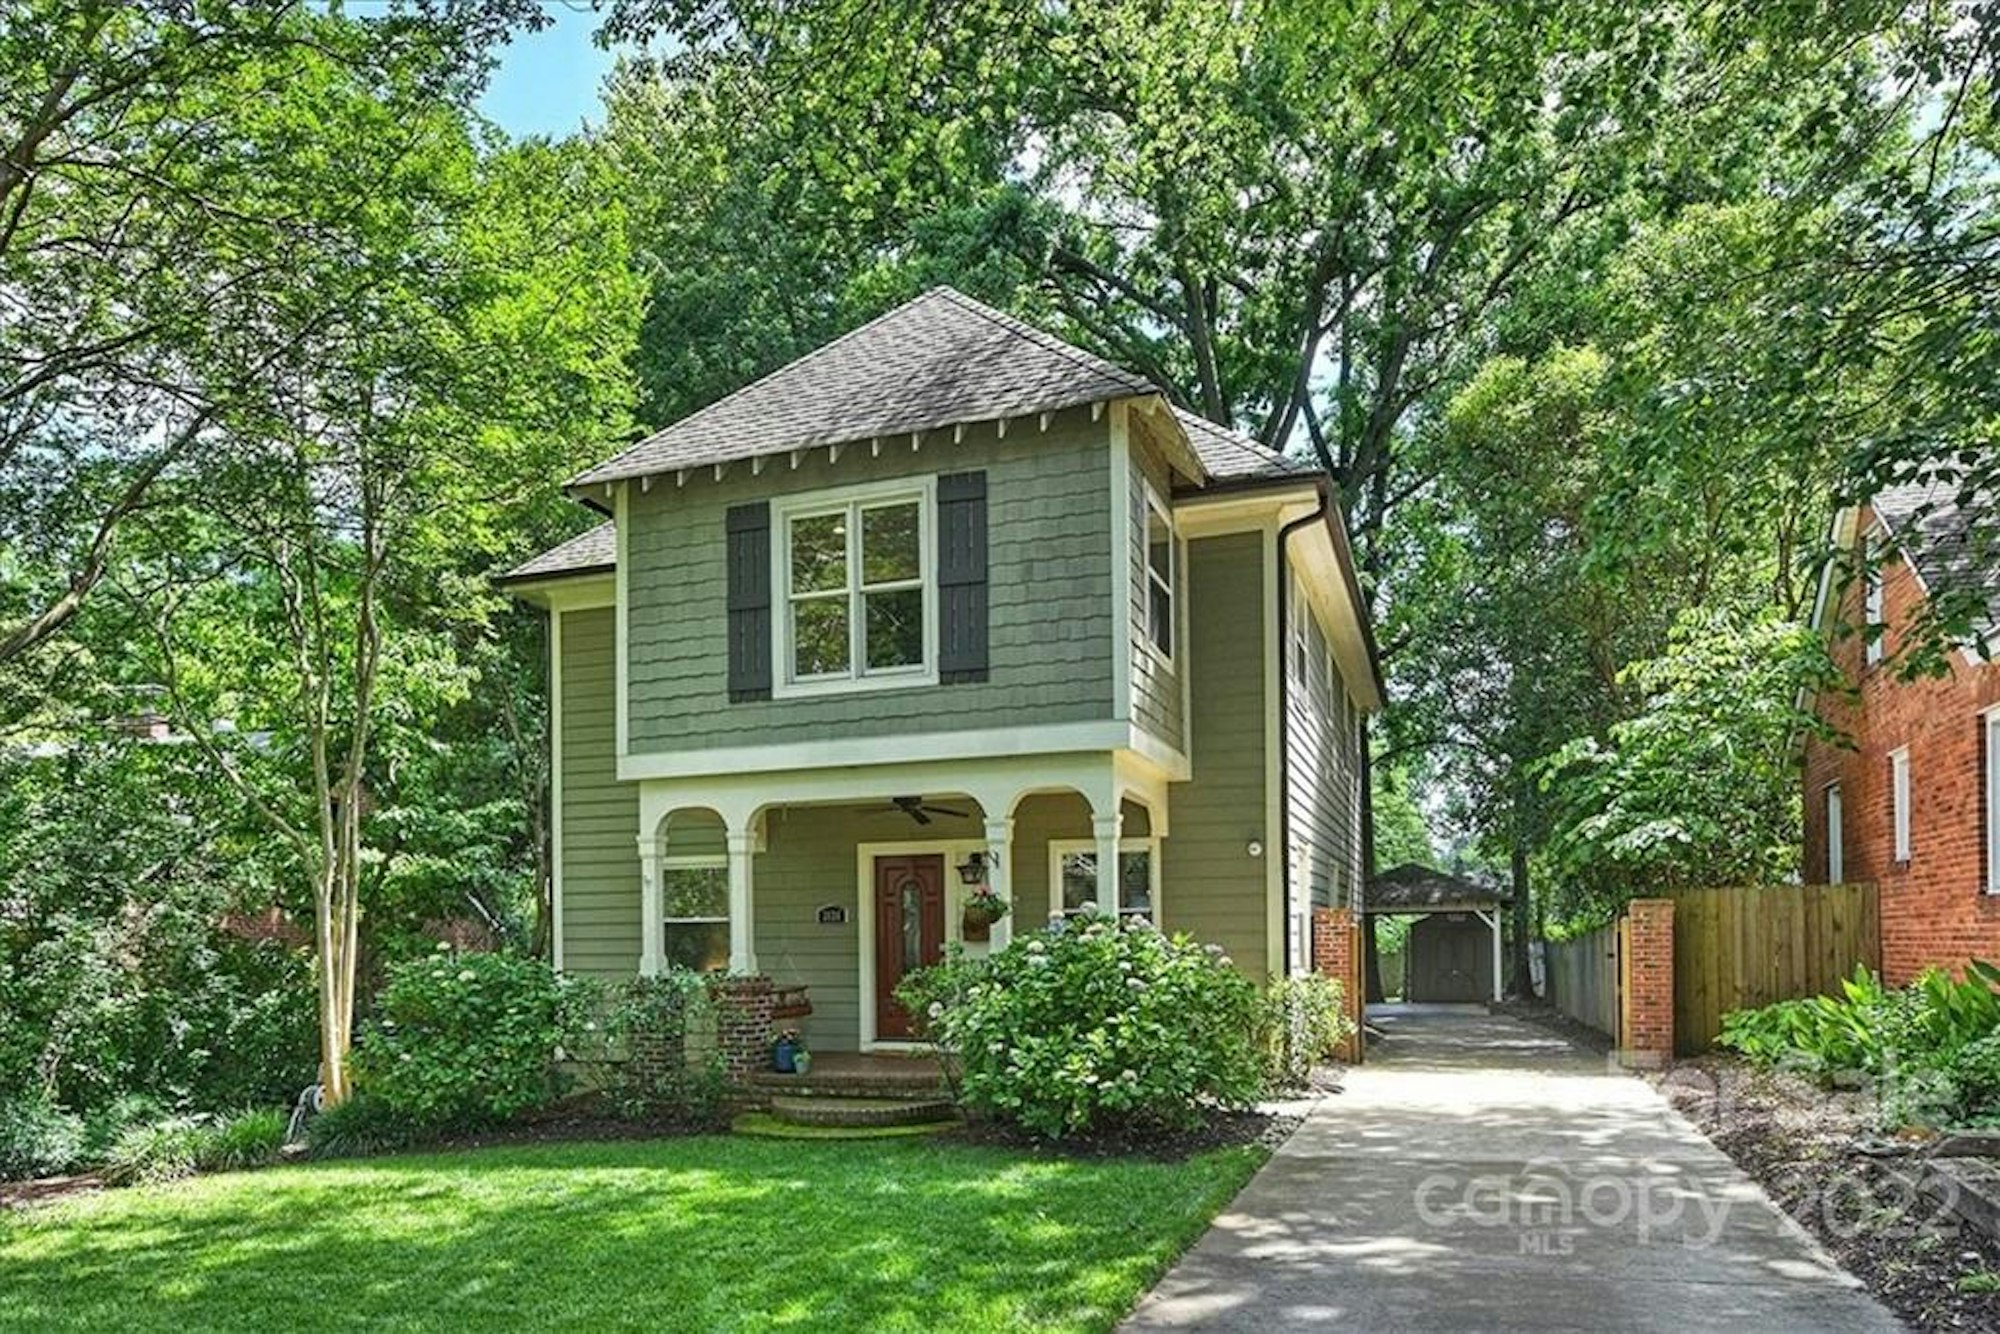 Photo 1 of 43 - 3136 Commonwealth Ave, Charlotte, NC 28205